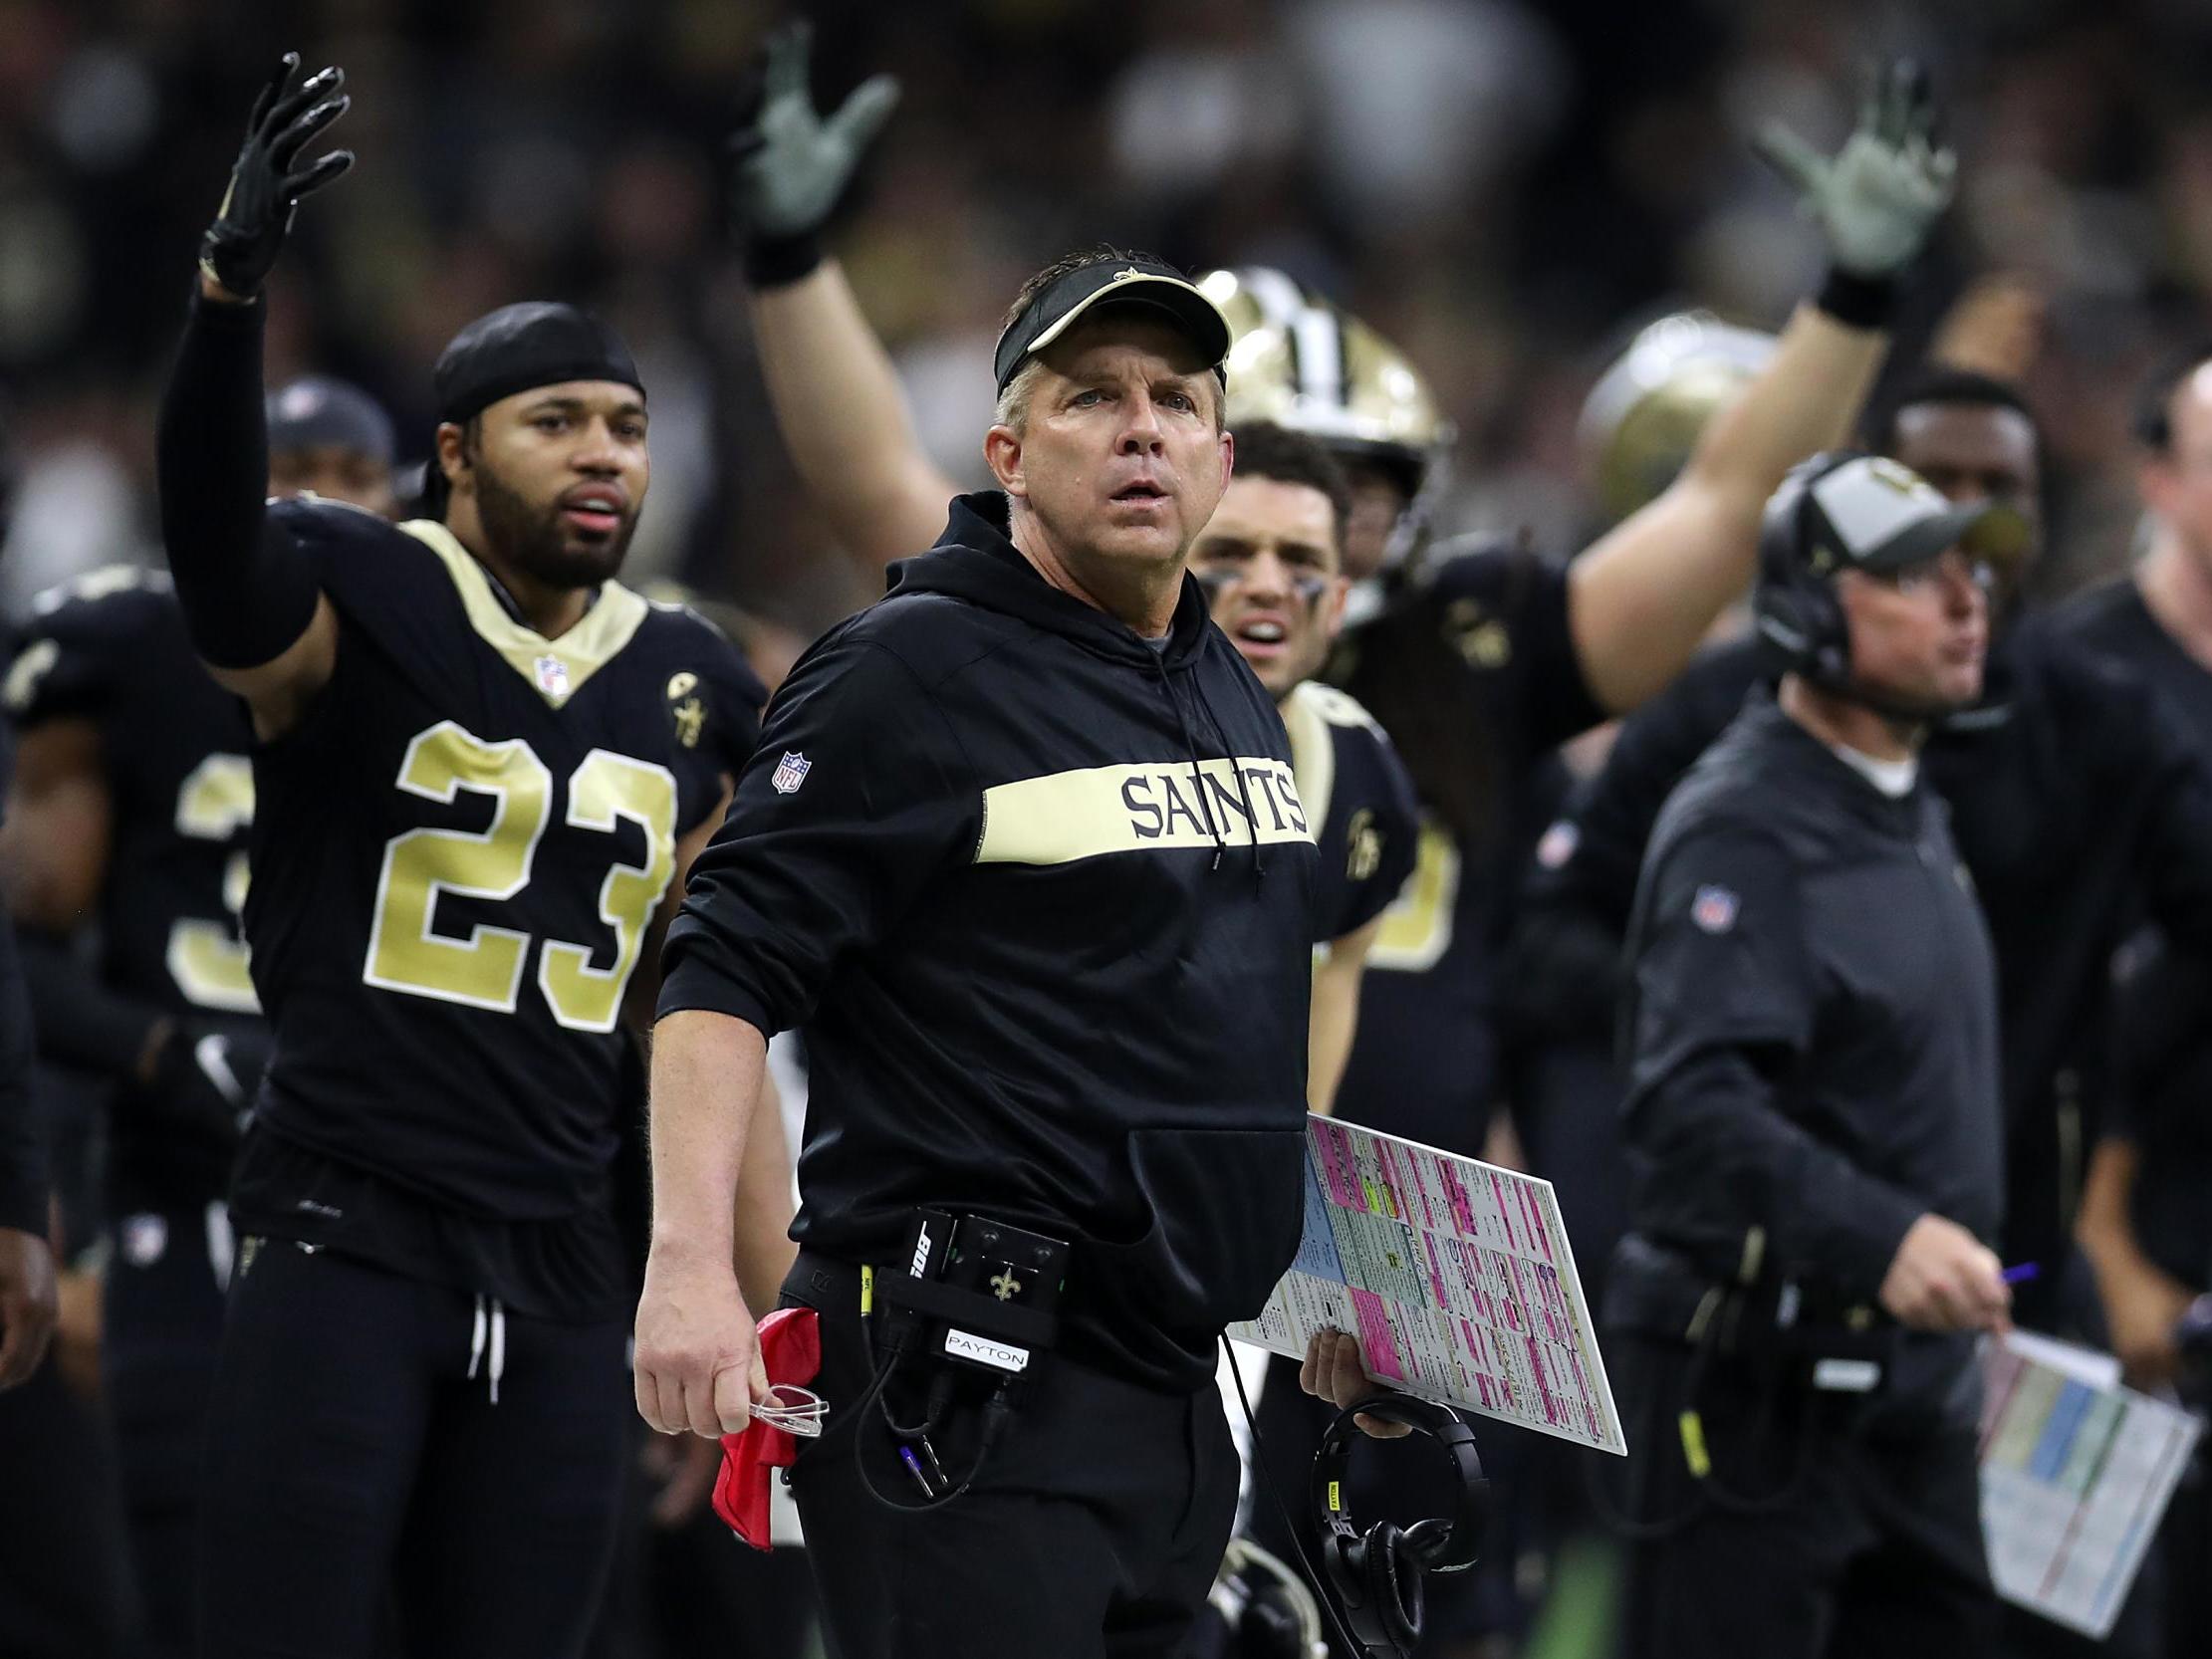 Under current rules head coach Sean Payton was unable to challenge the call